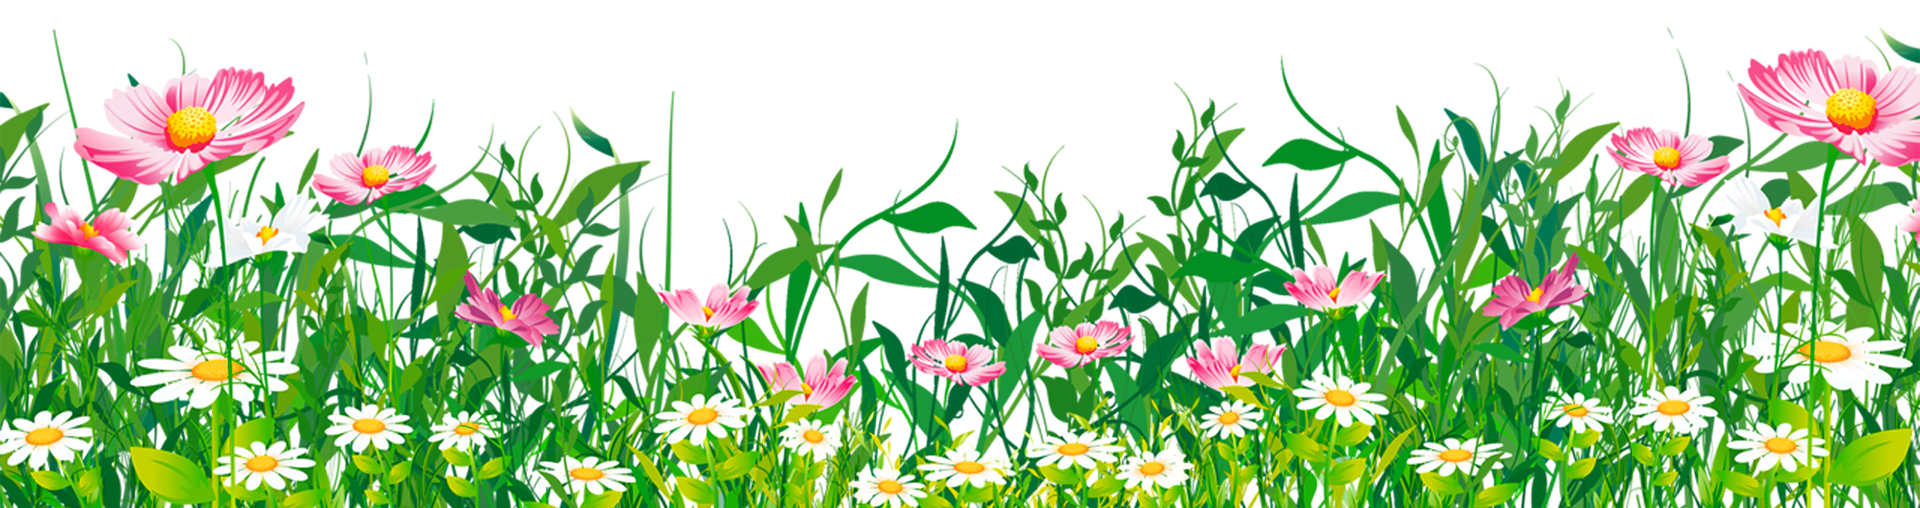 Grass and flowers free clipart